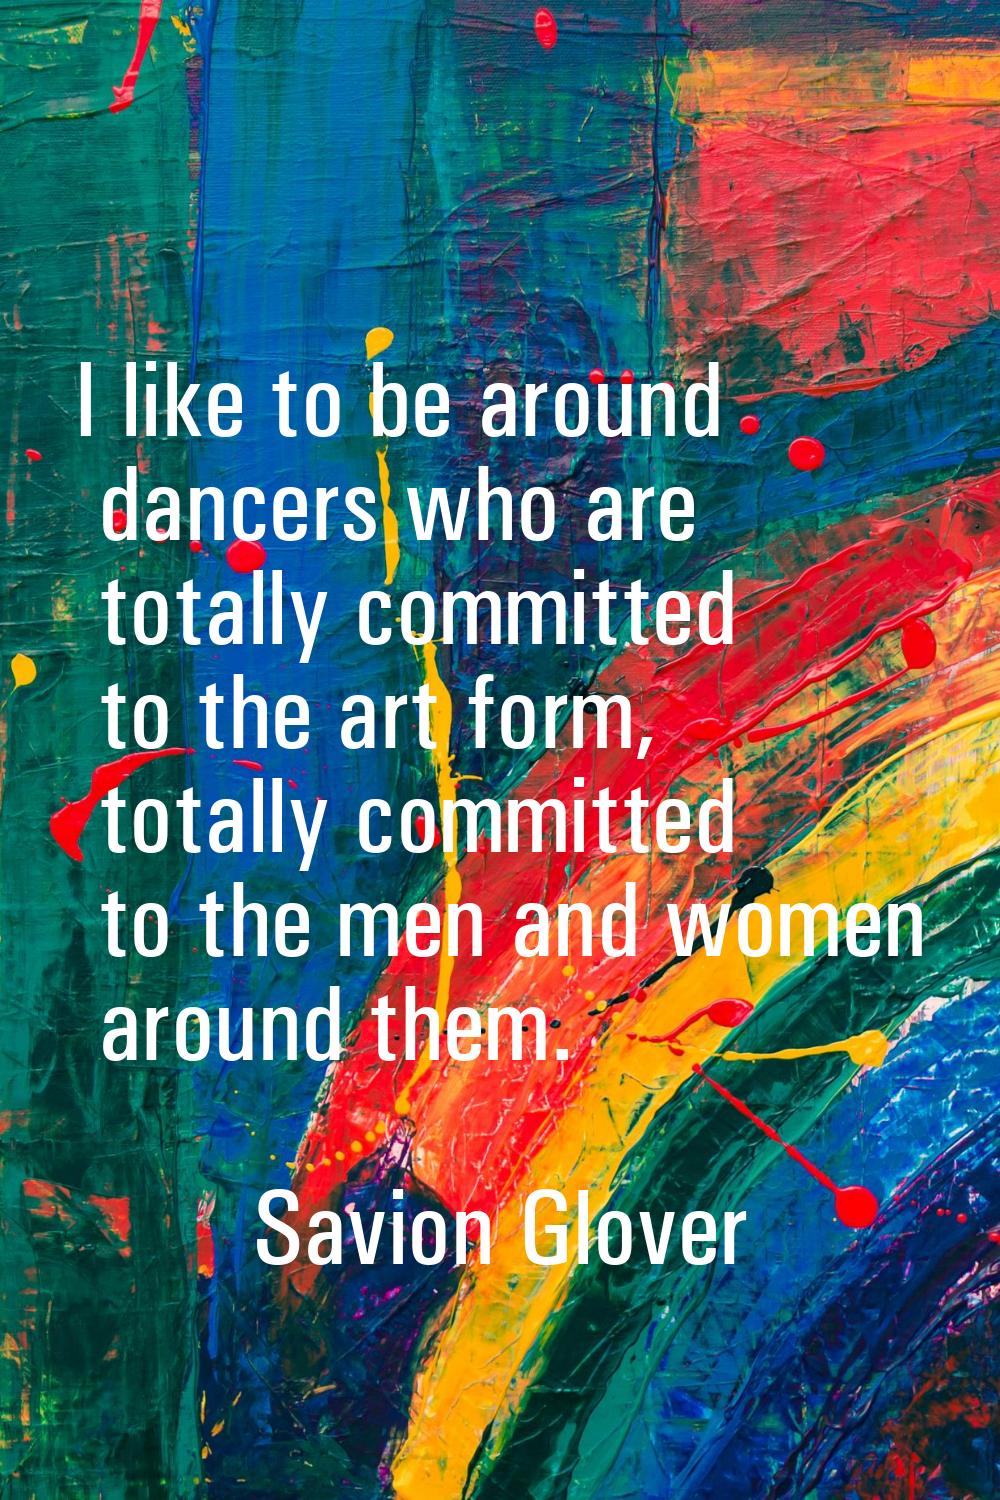 I like to be around dancers who are totally committed to the art form, totally committed to the men